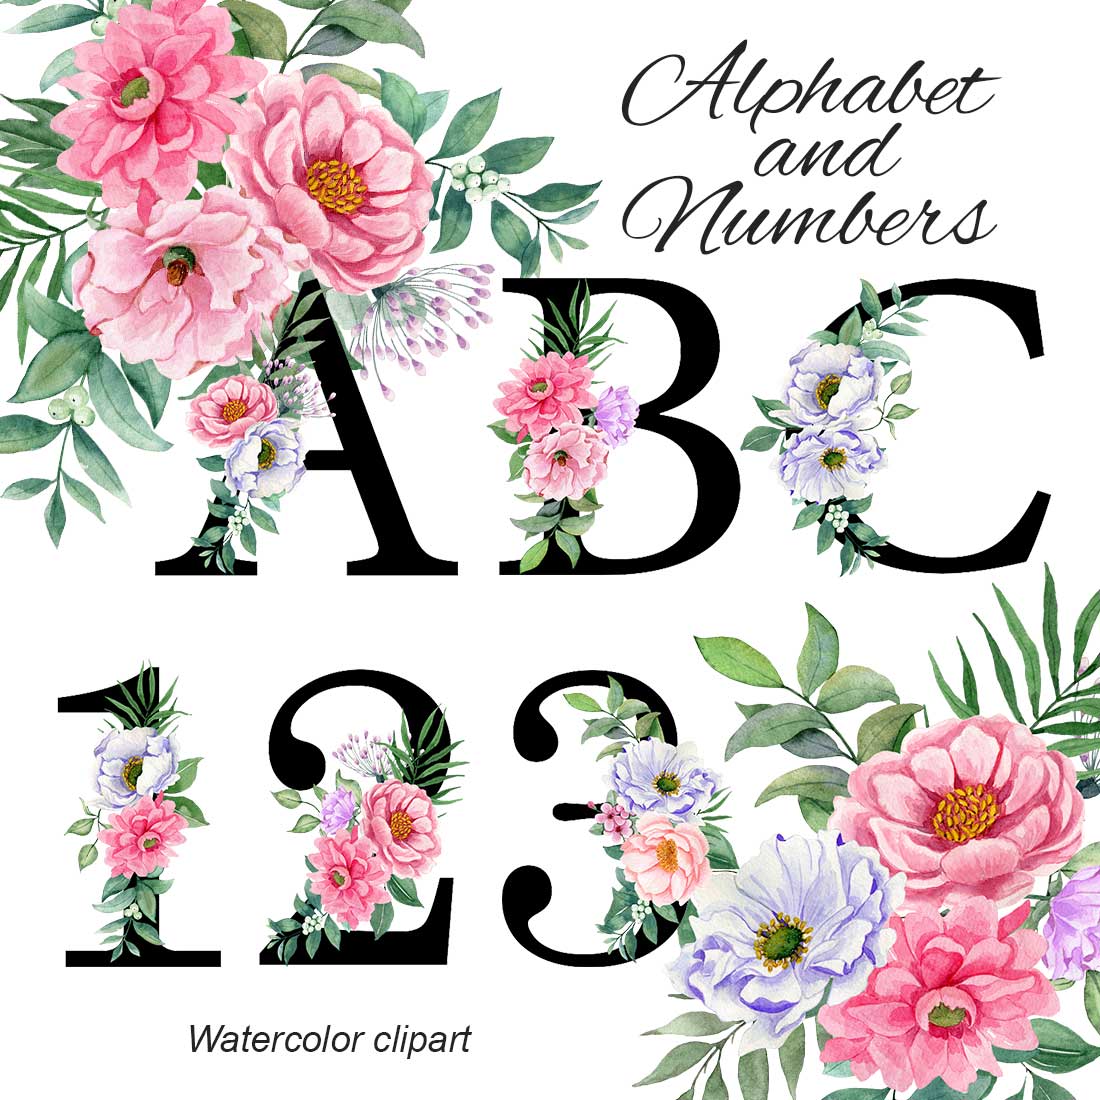 Alphabet with Watercolor Flowers, Letters, Monogram, Numbers cover image.